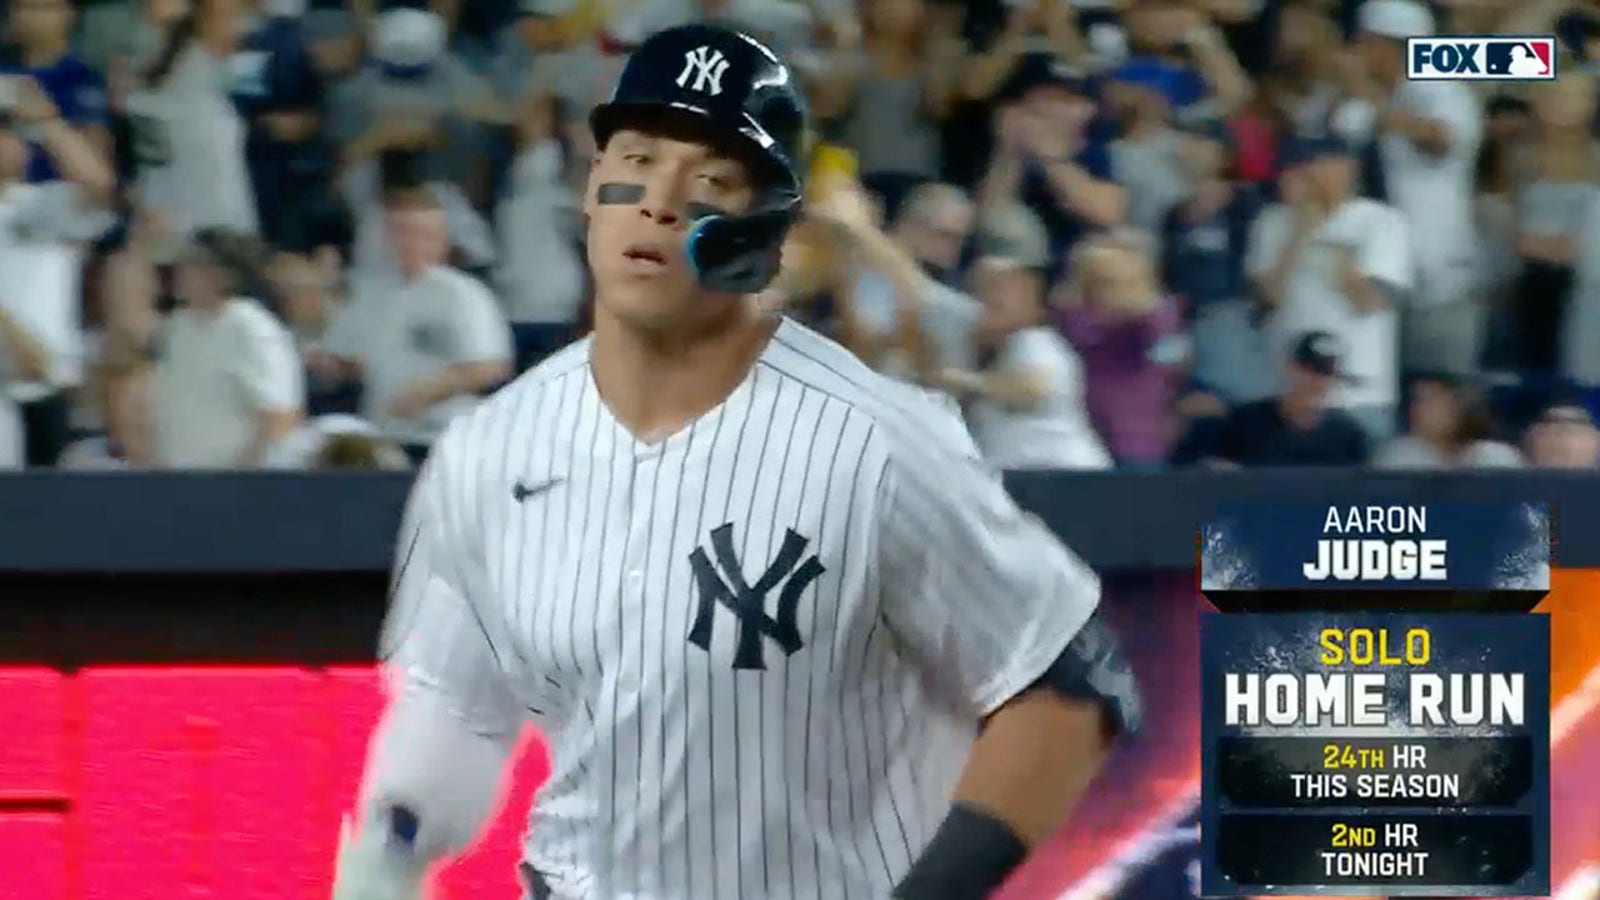 Aaron Judge hits his league-leading 24th HR